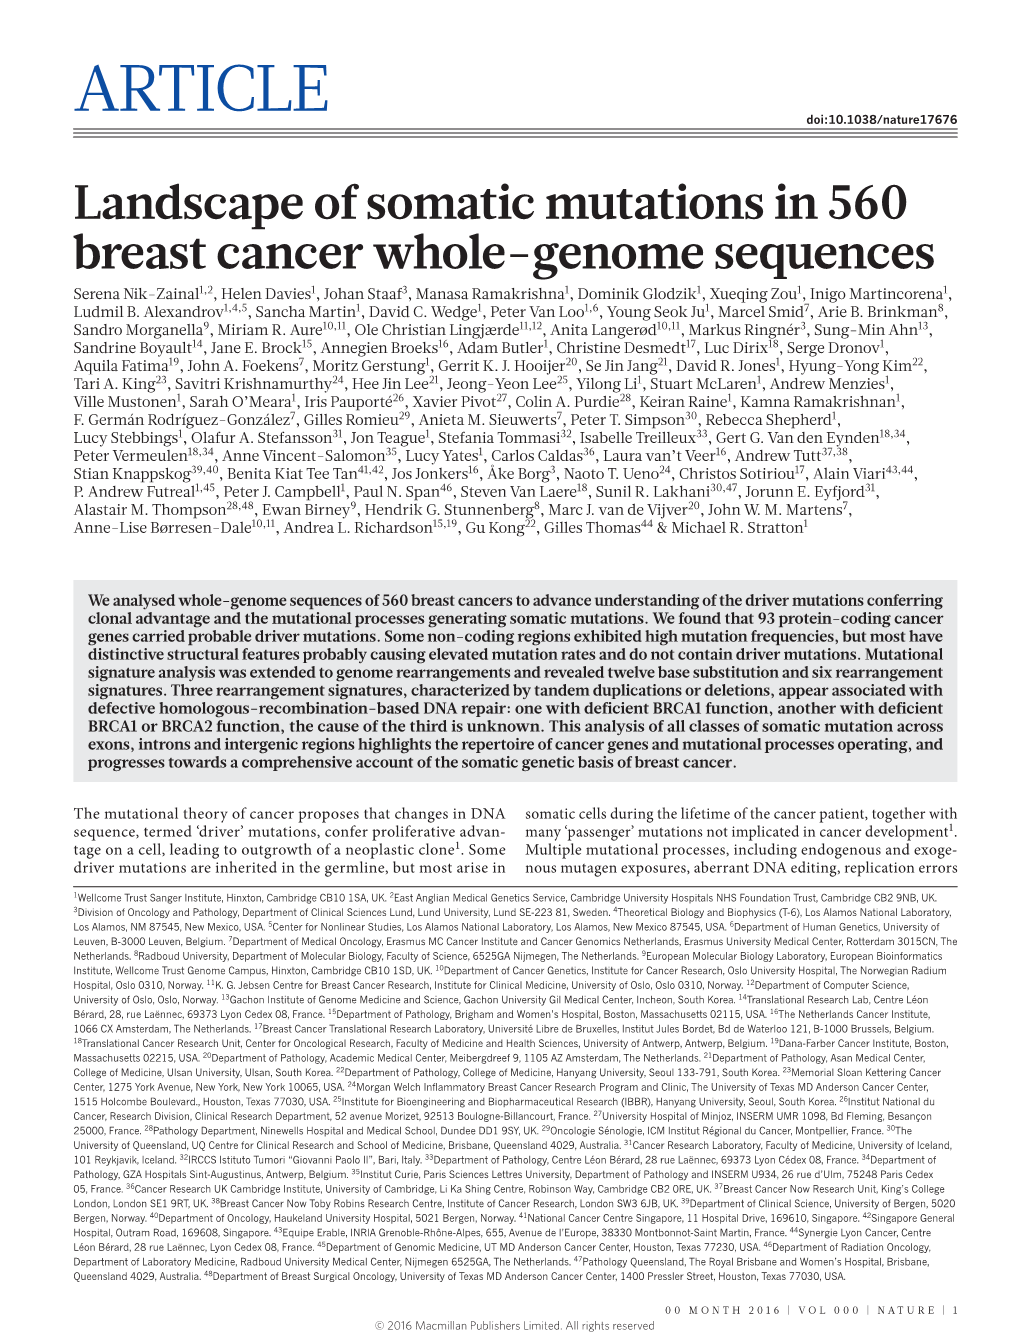 Landscape of Somatic Mutations in 560 Breast Cancer Whole-Genome